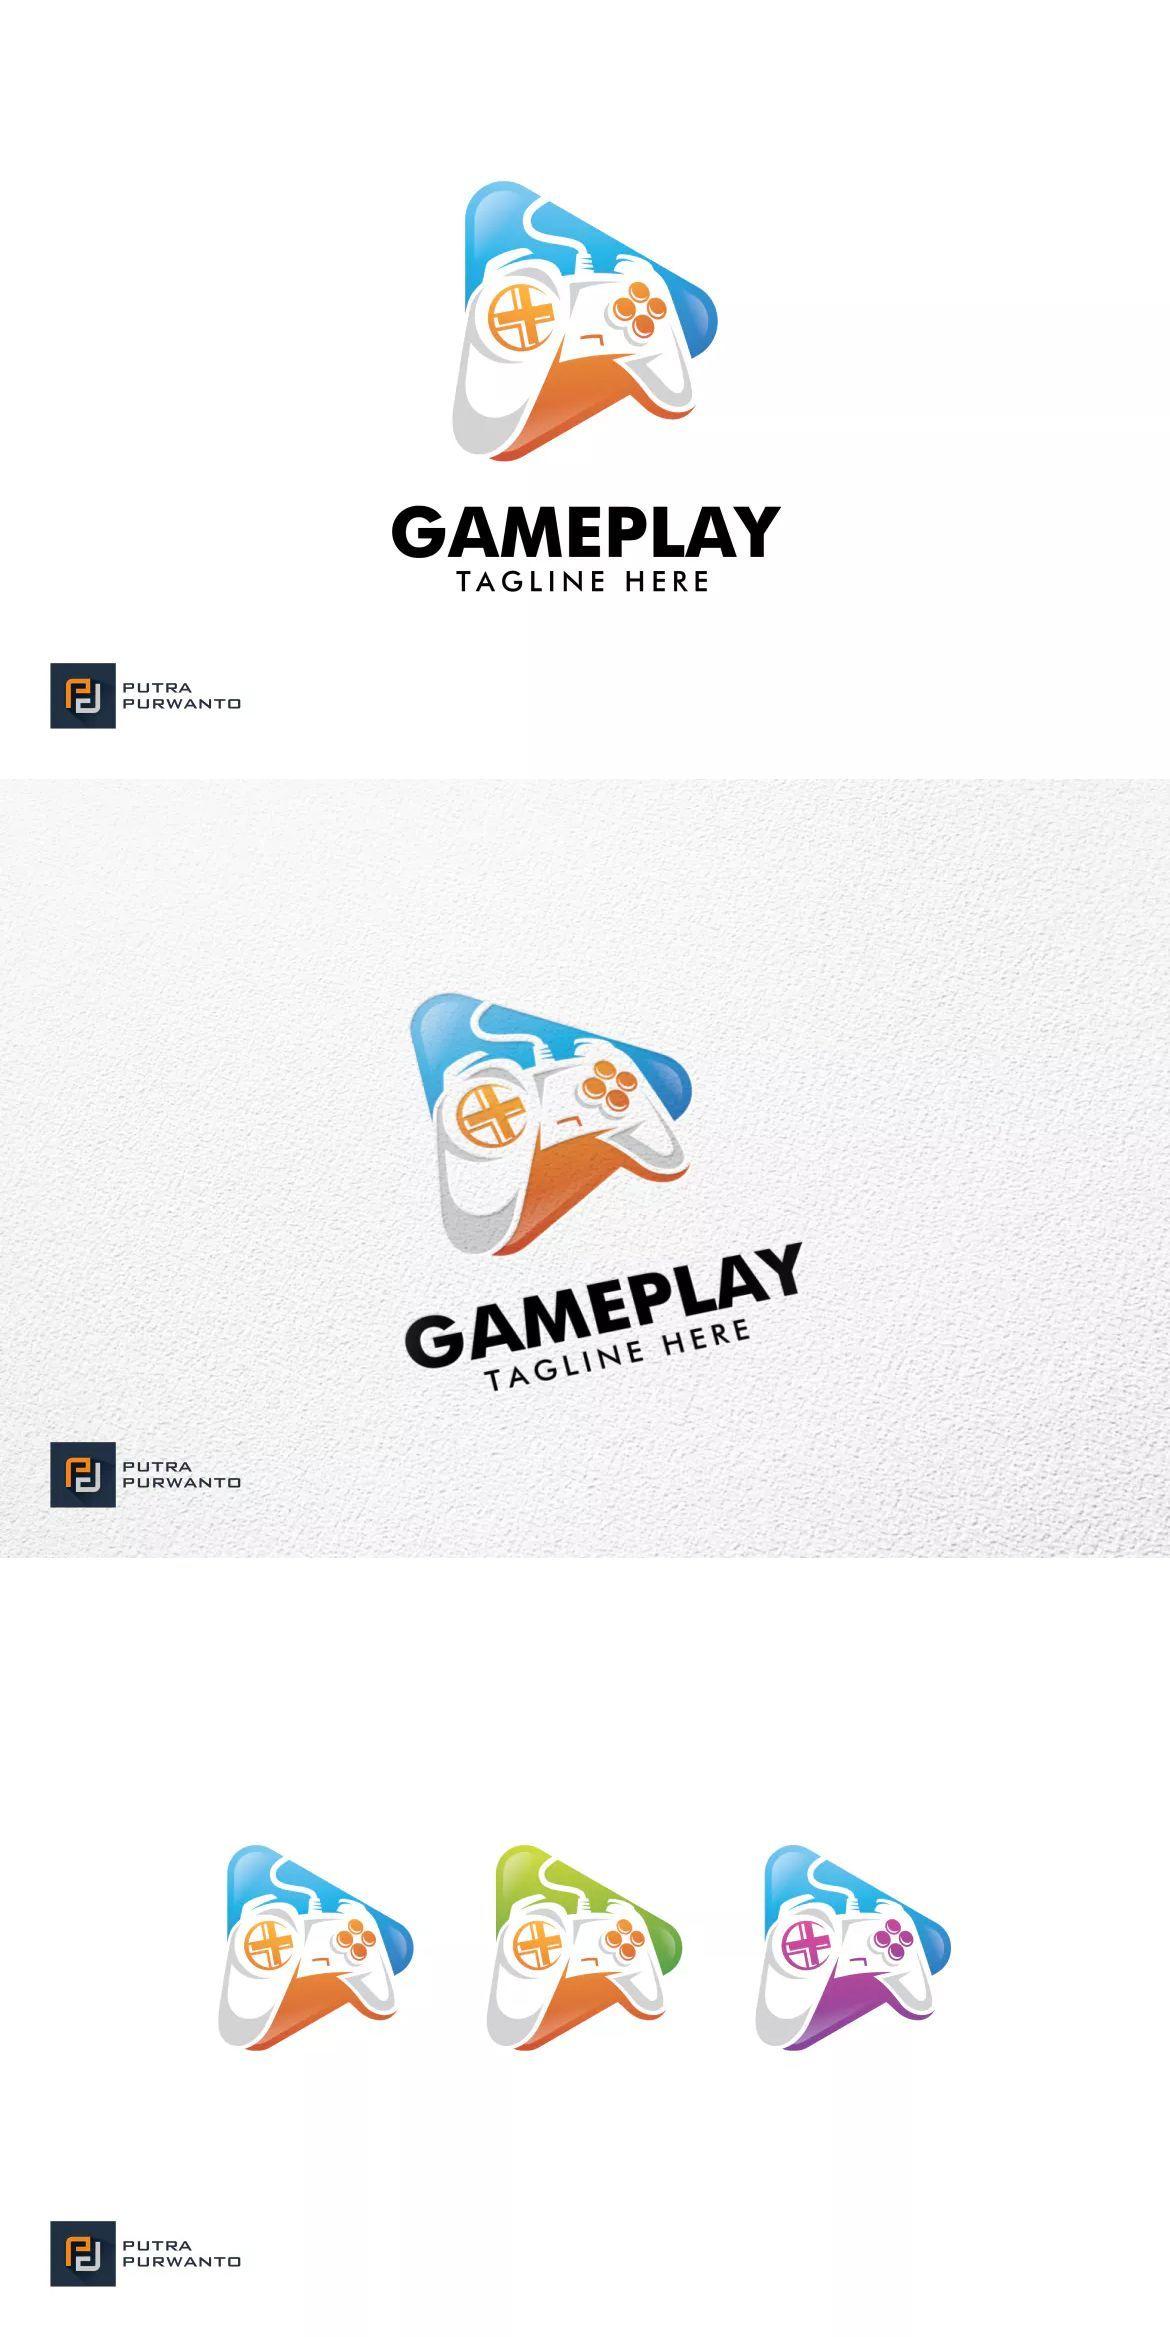 Gameplay Logo - Gameplay Template AI, EPS colour variations% Re